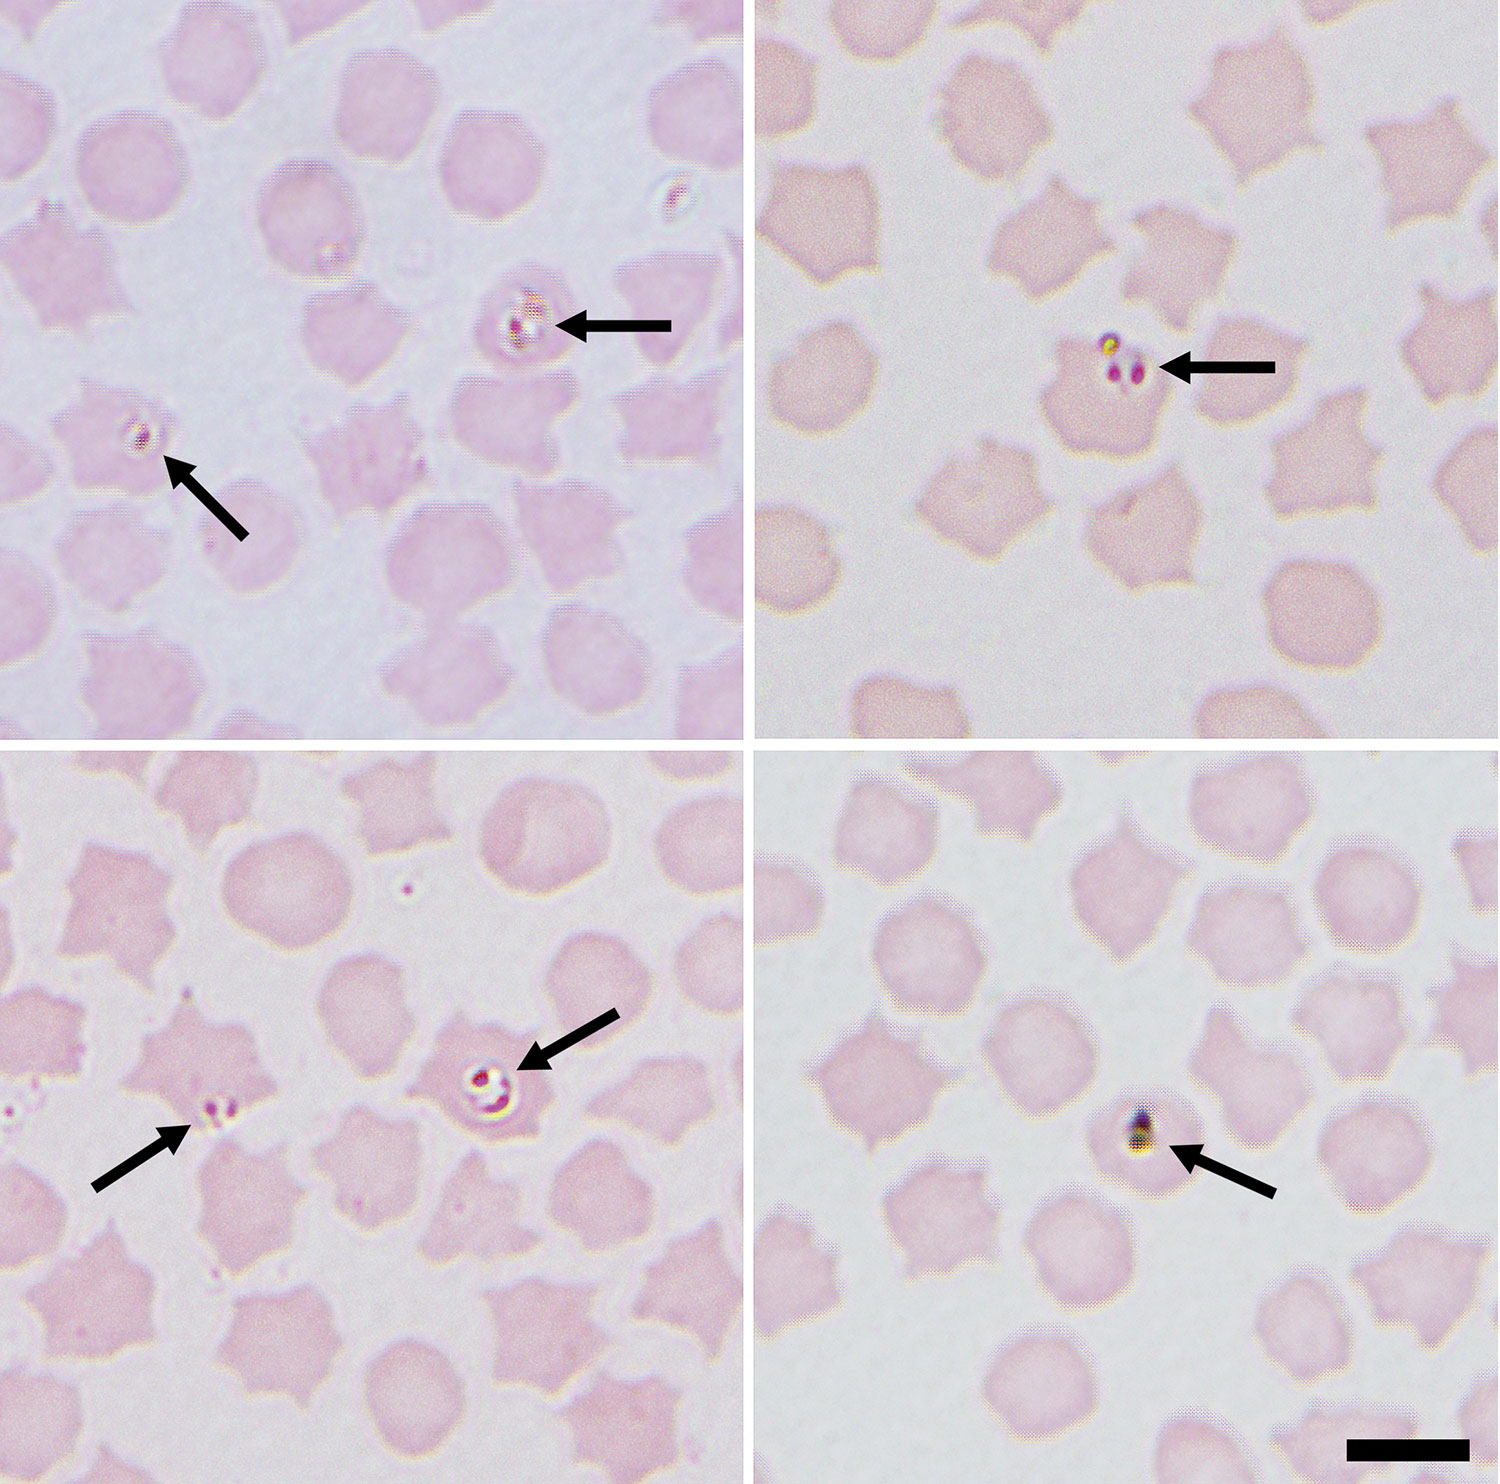 Representative images of small intracellular Babesia (arrows) identified in sheep erythrocytes from several sites in northeastern Scotland, UK. Both paired piroforms and ring forms are visible. Images were taken at ×1,000 magnification with oil immersion. Scale bar indicates 5 μm.